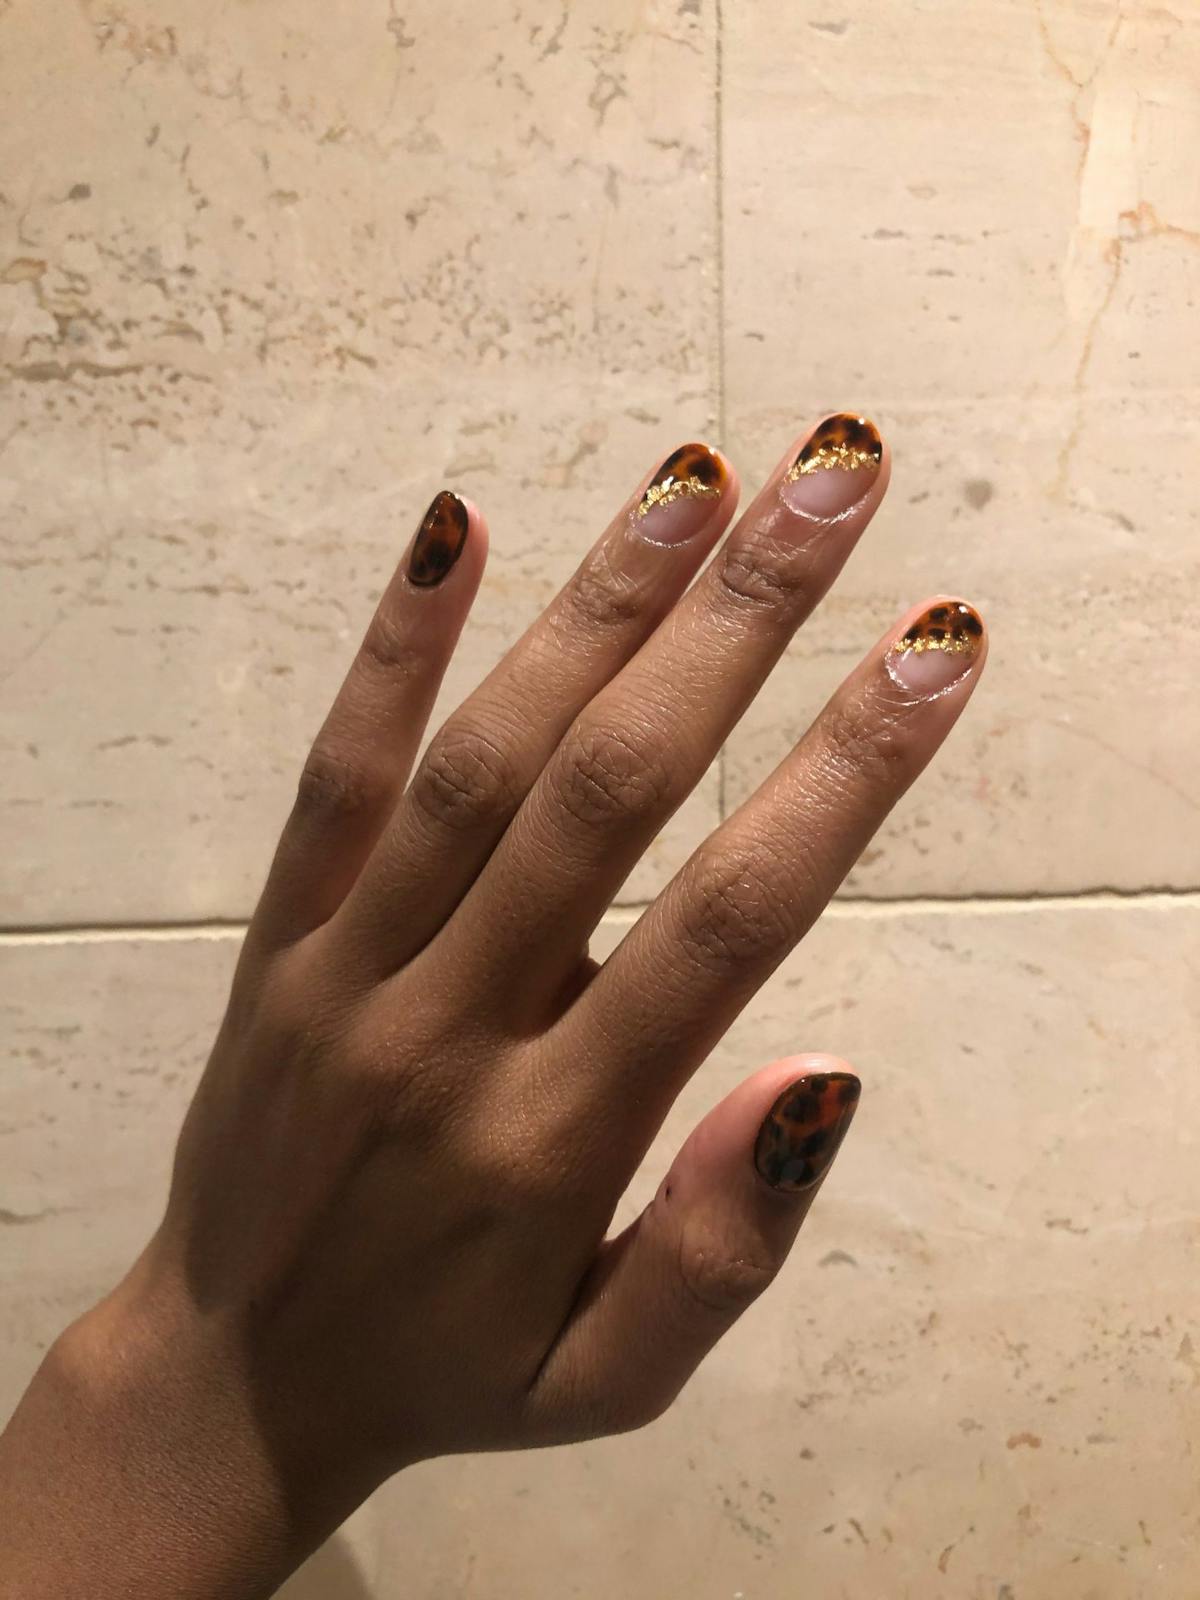 Tortoise shell nail art: how it's done